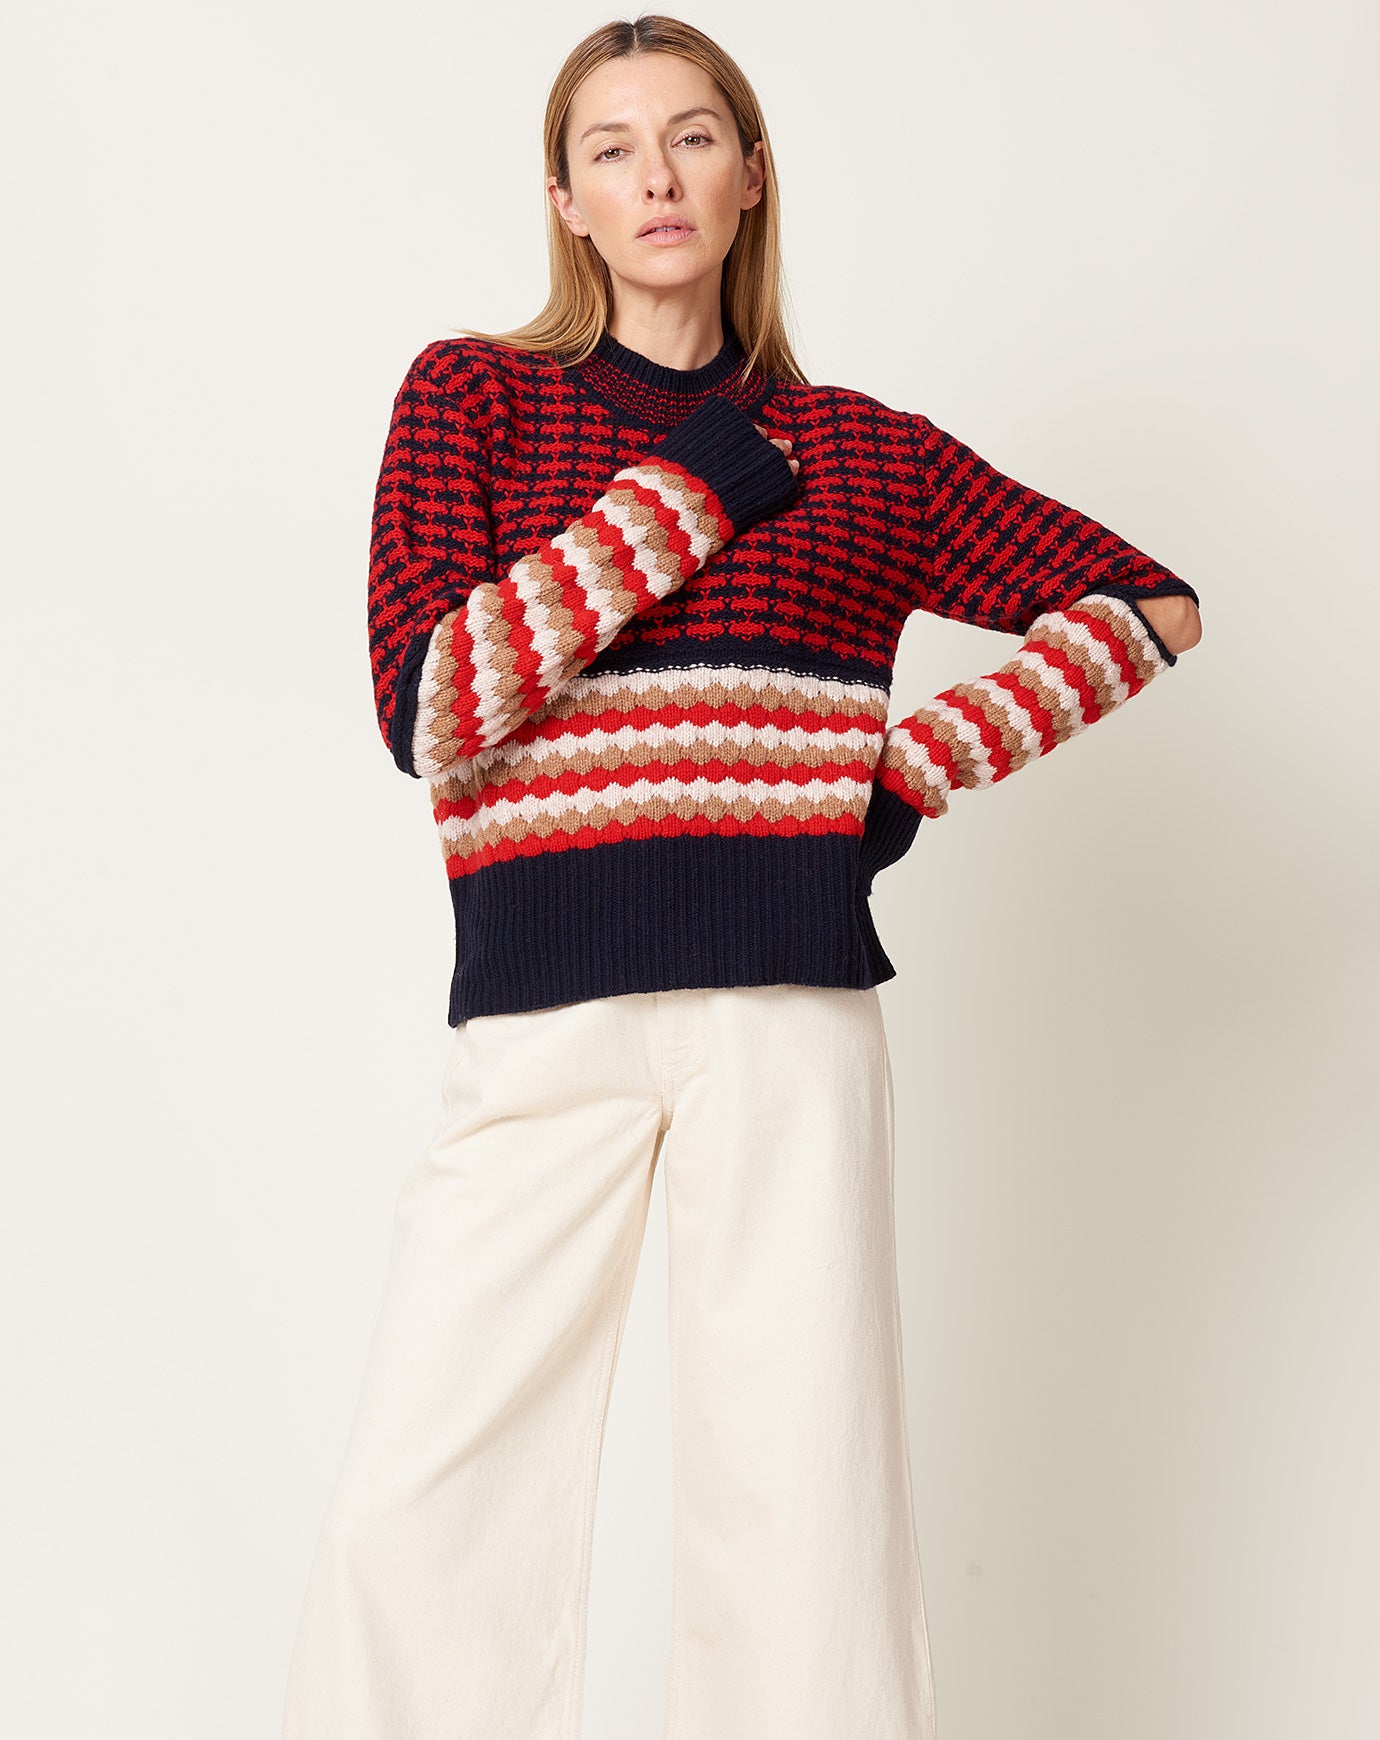 Babaco Patterned Knit Pullover in Navy & Red